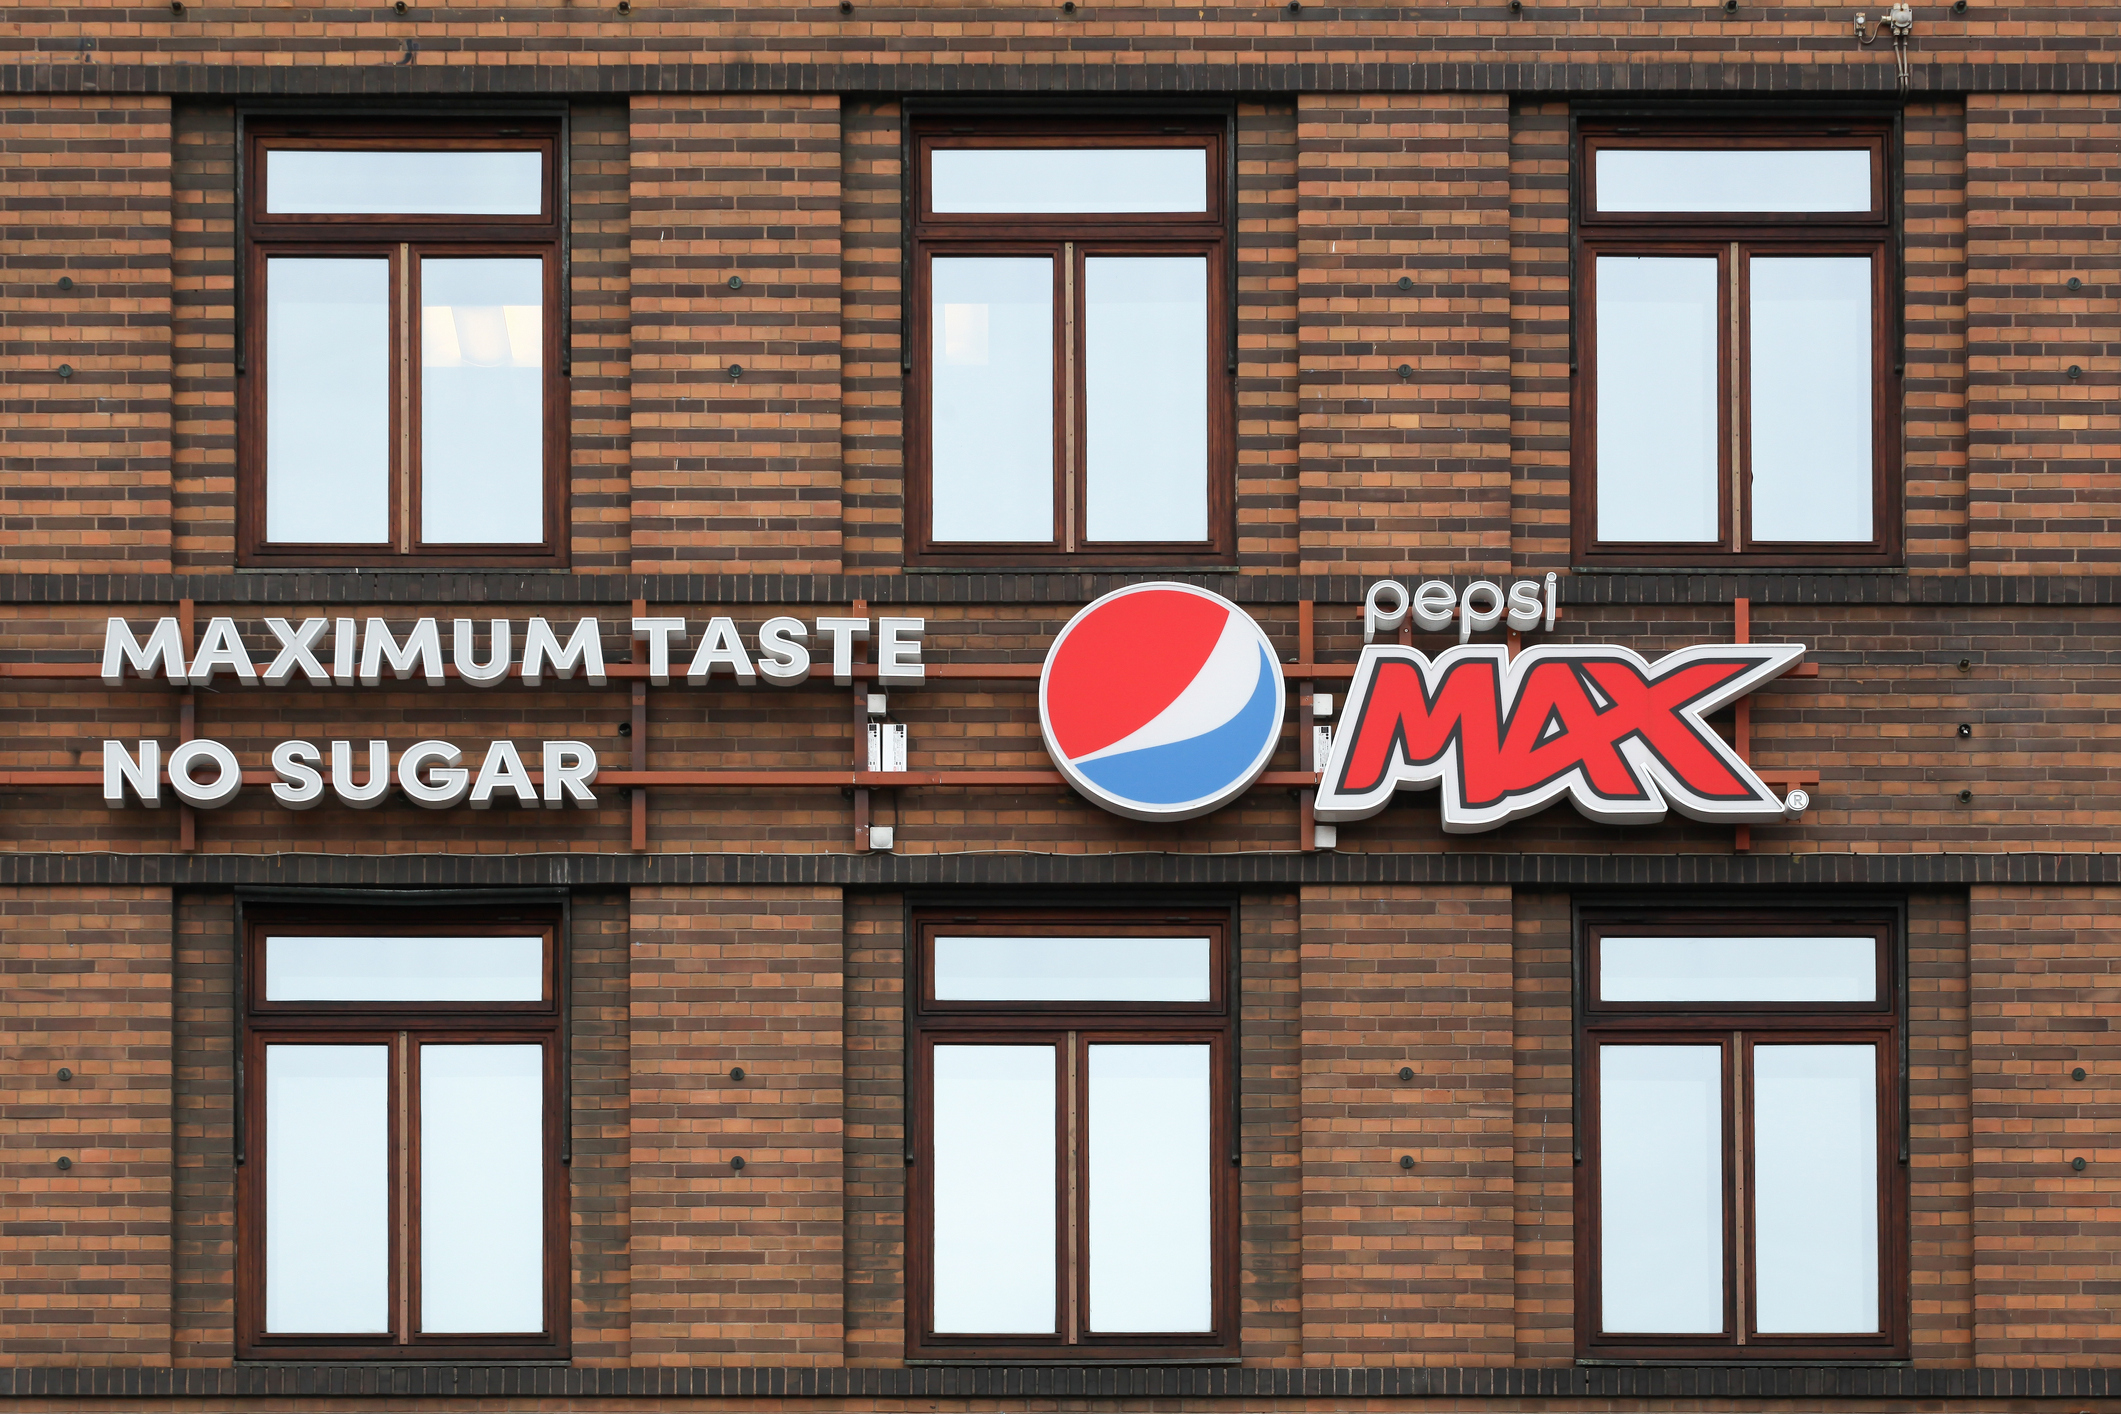 Pepsi max adverstising on a wall